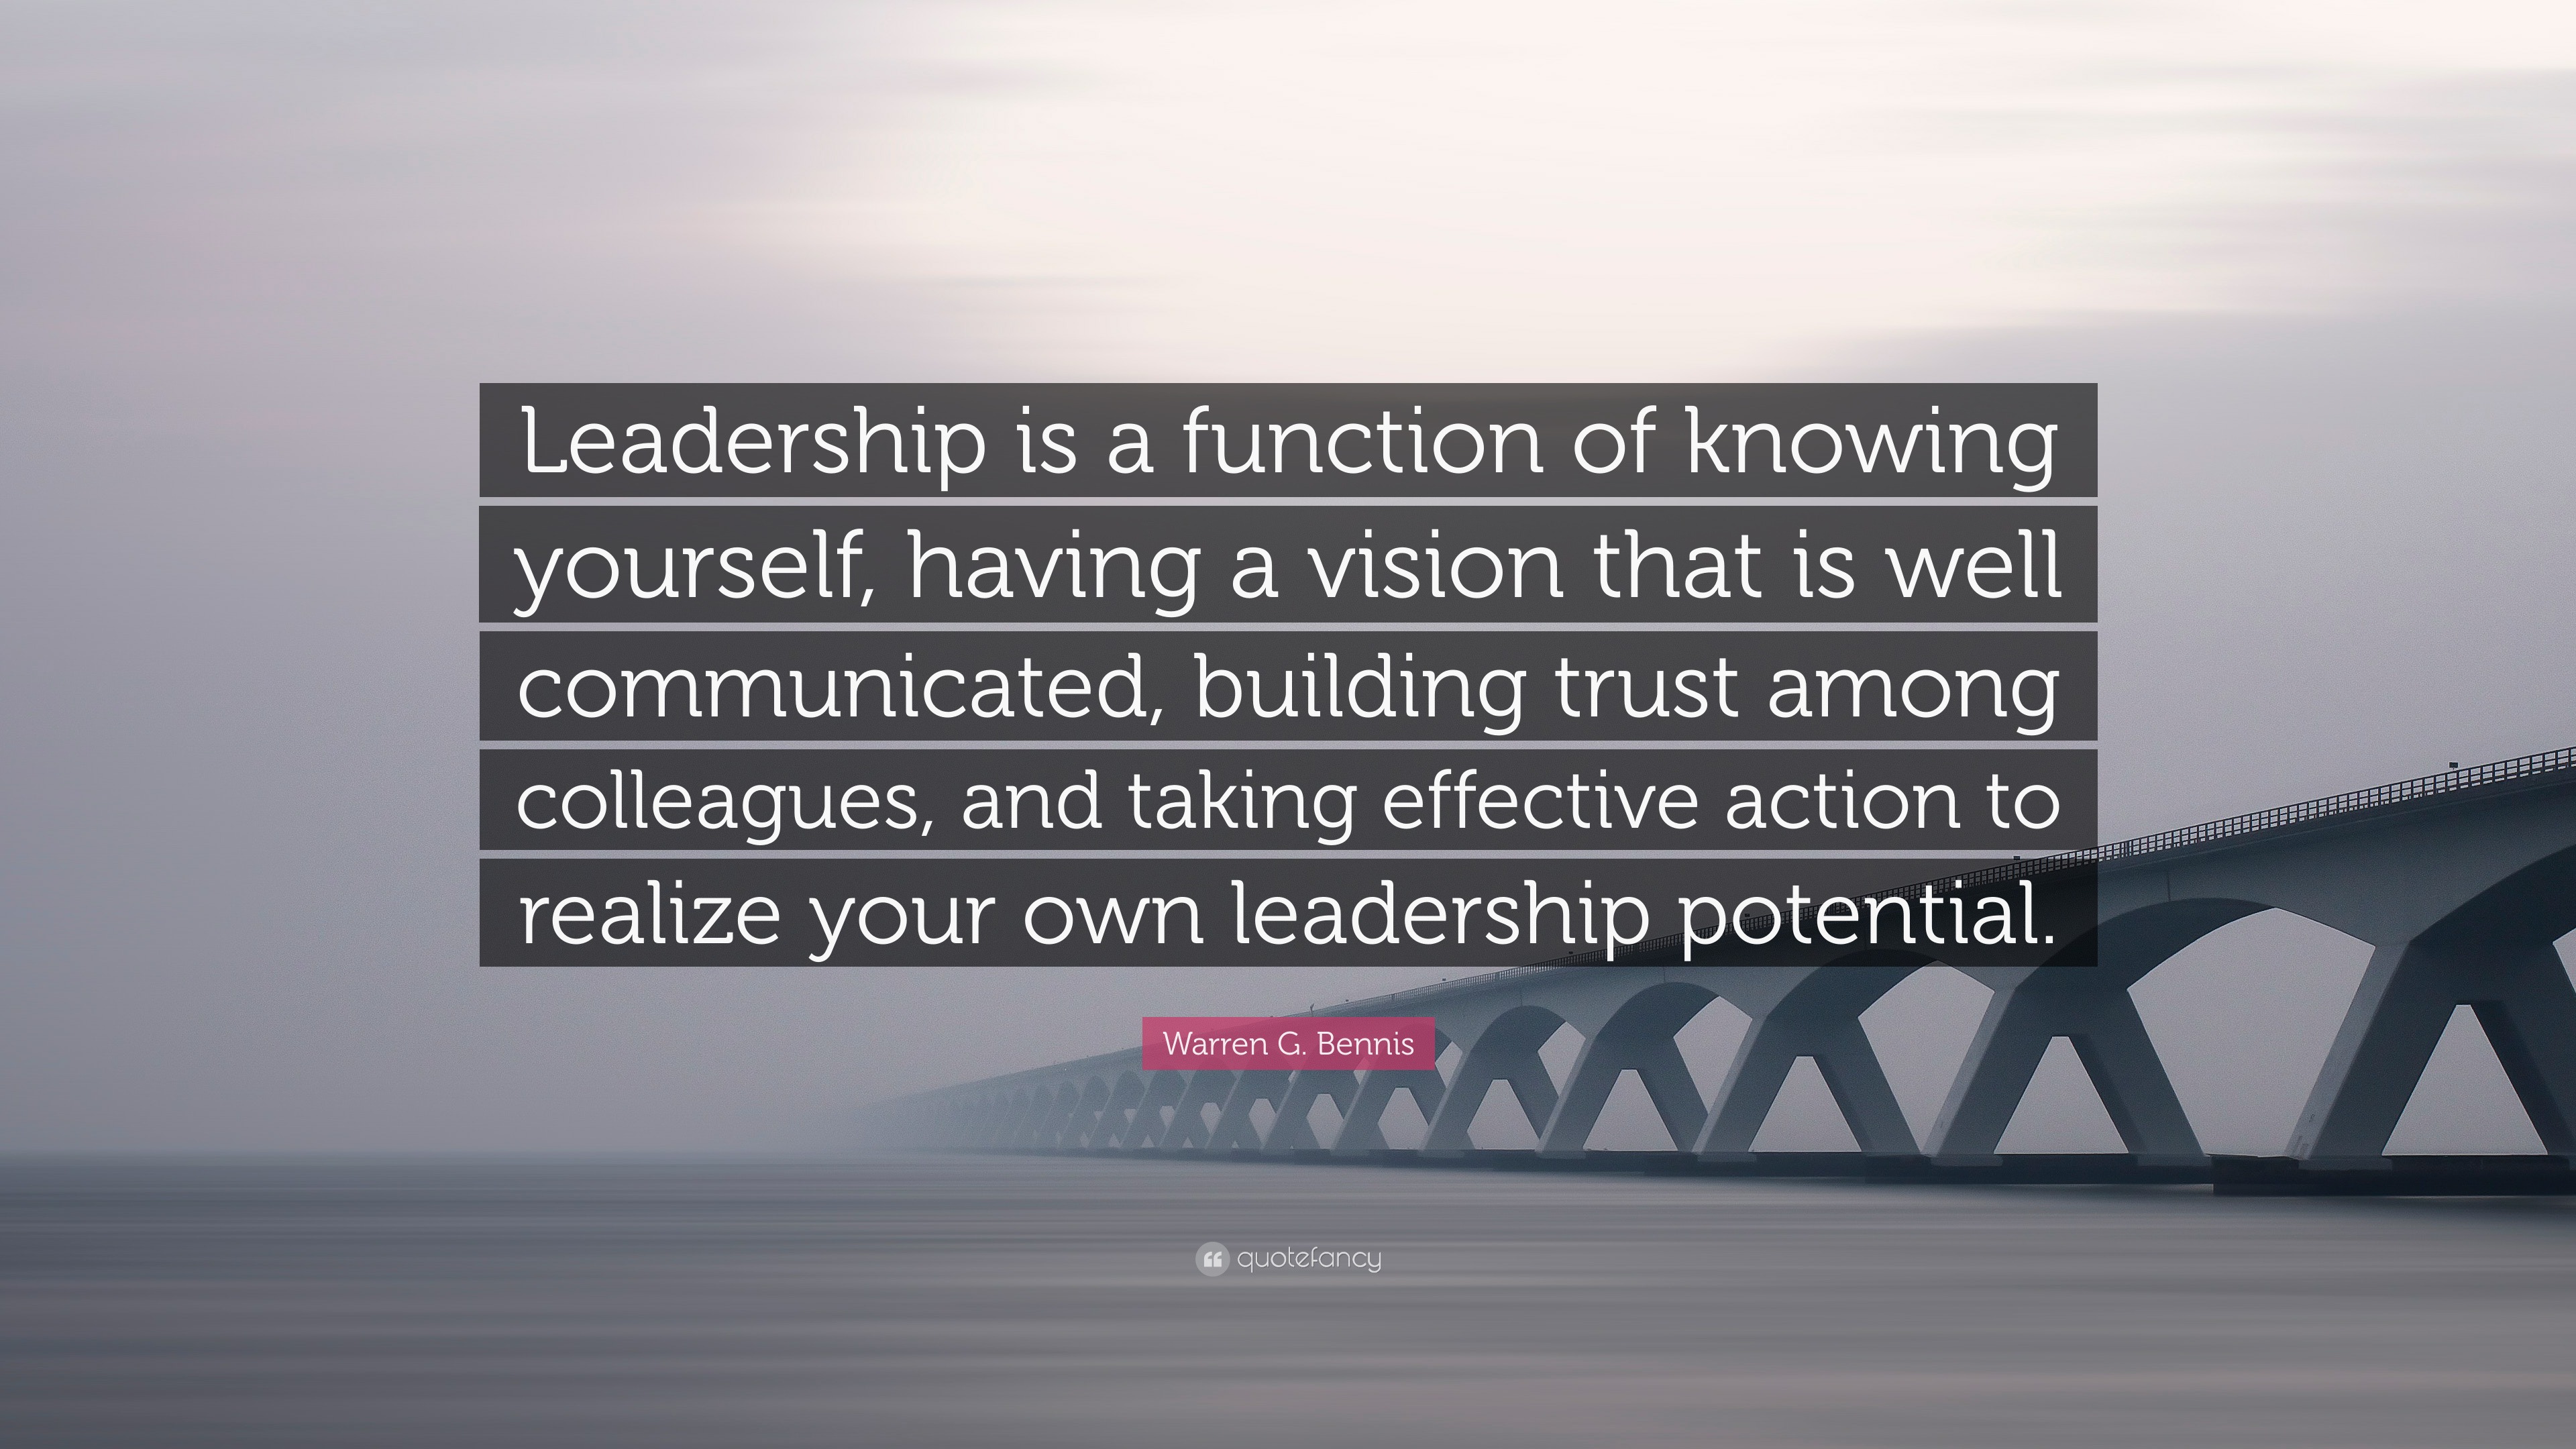 Warren G. Bennis Quote: “Leadership is a function of knowing yourself